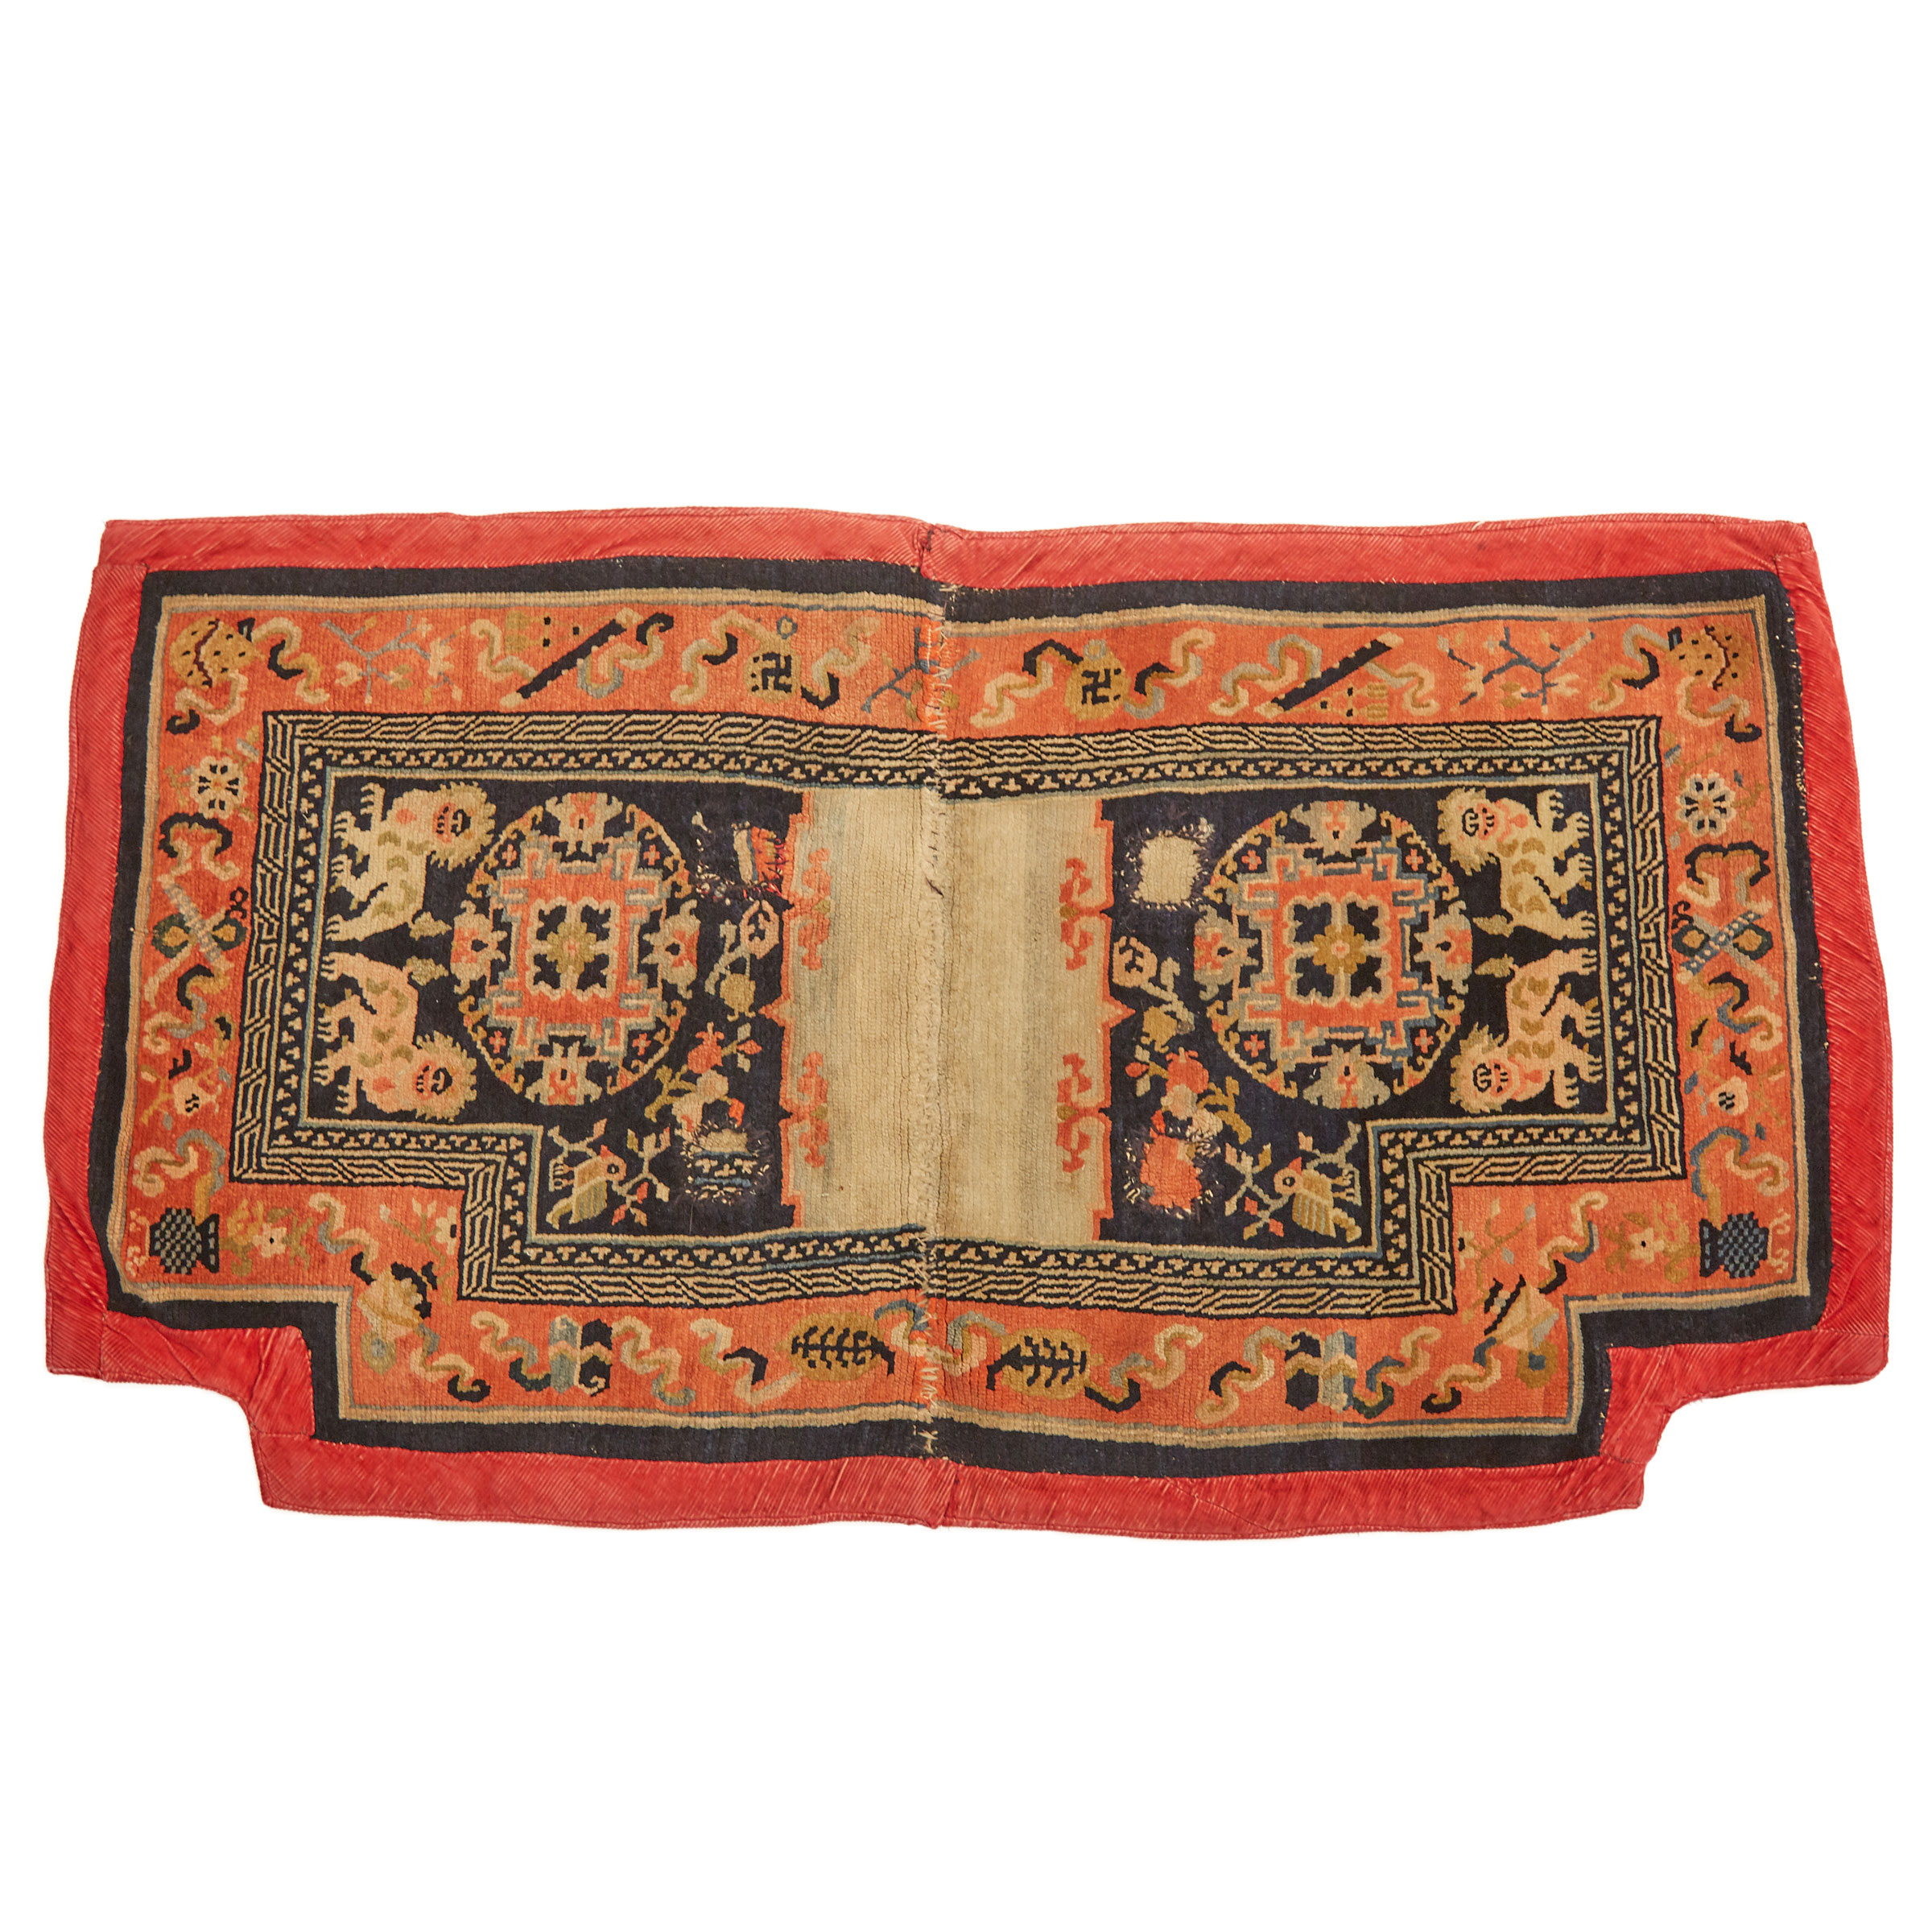 Chinese Throne Cover, late 19th century